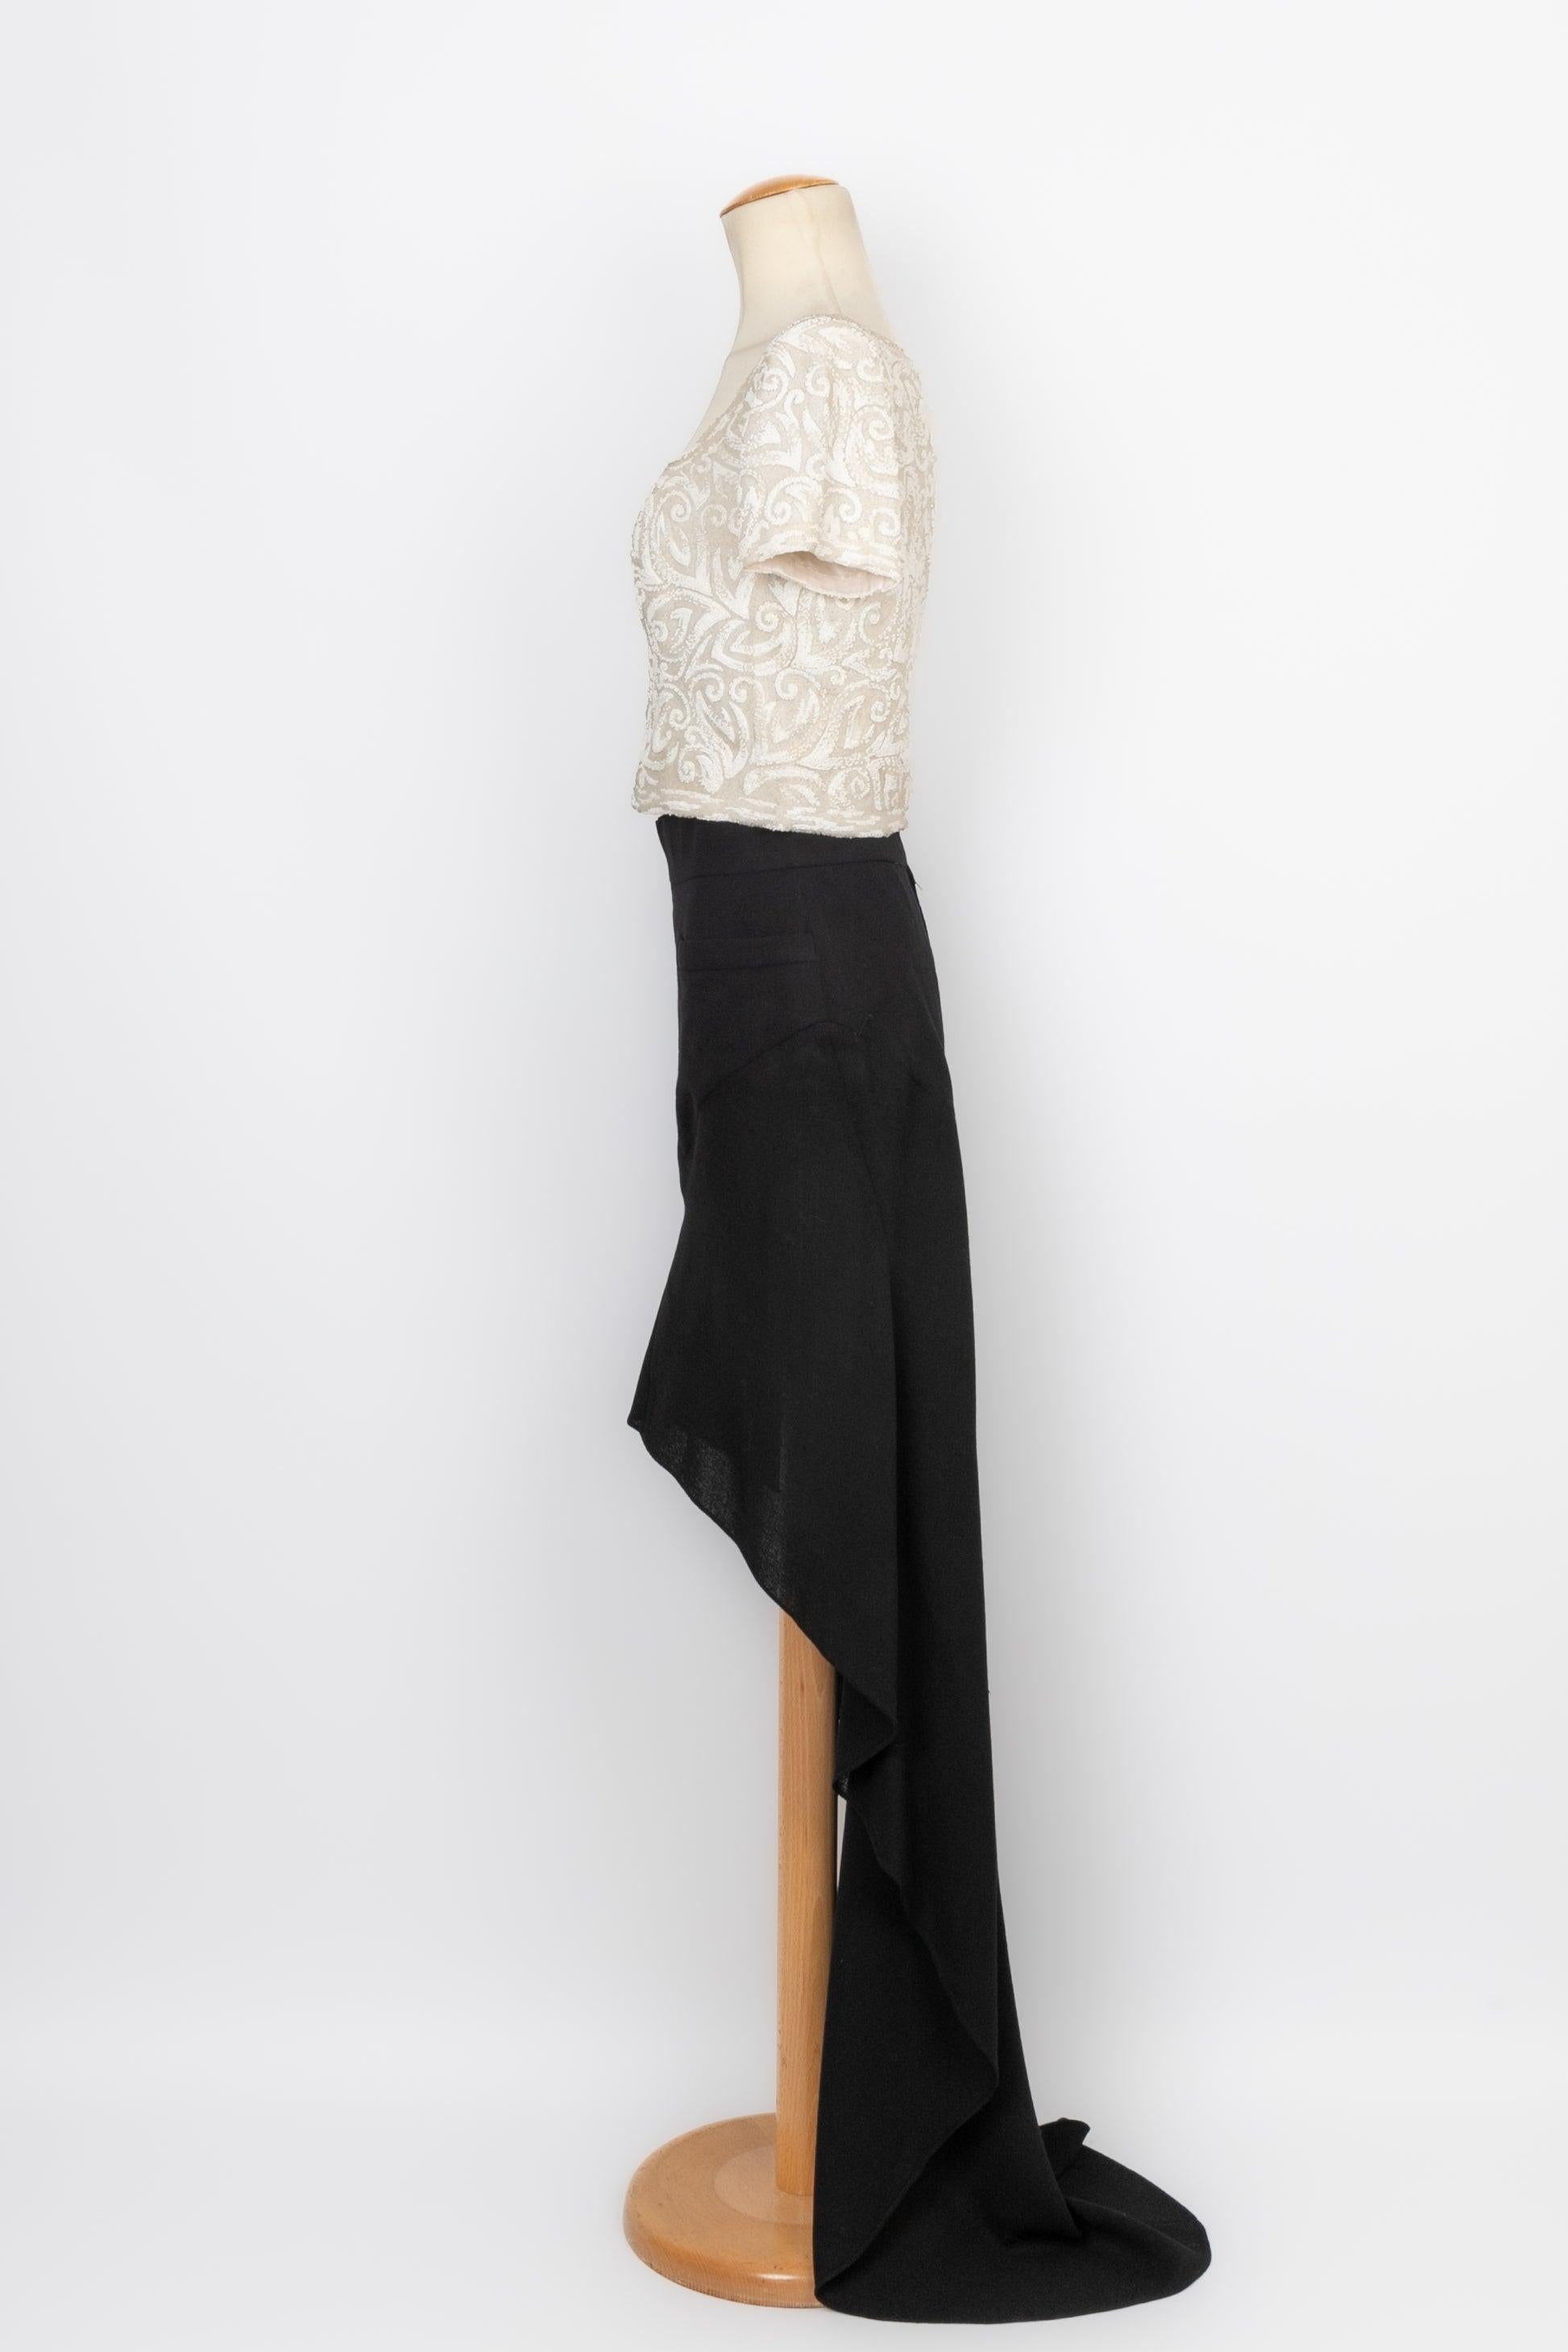 Women's Chanel Haute Couture Set of Blouse with Crepe Skirt, 1994 For Sale